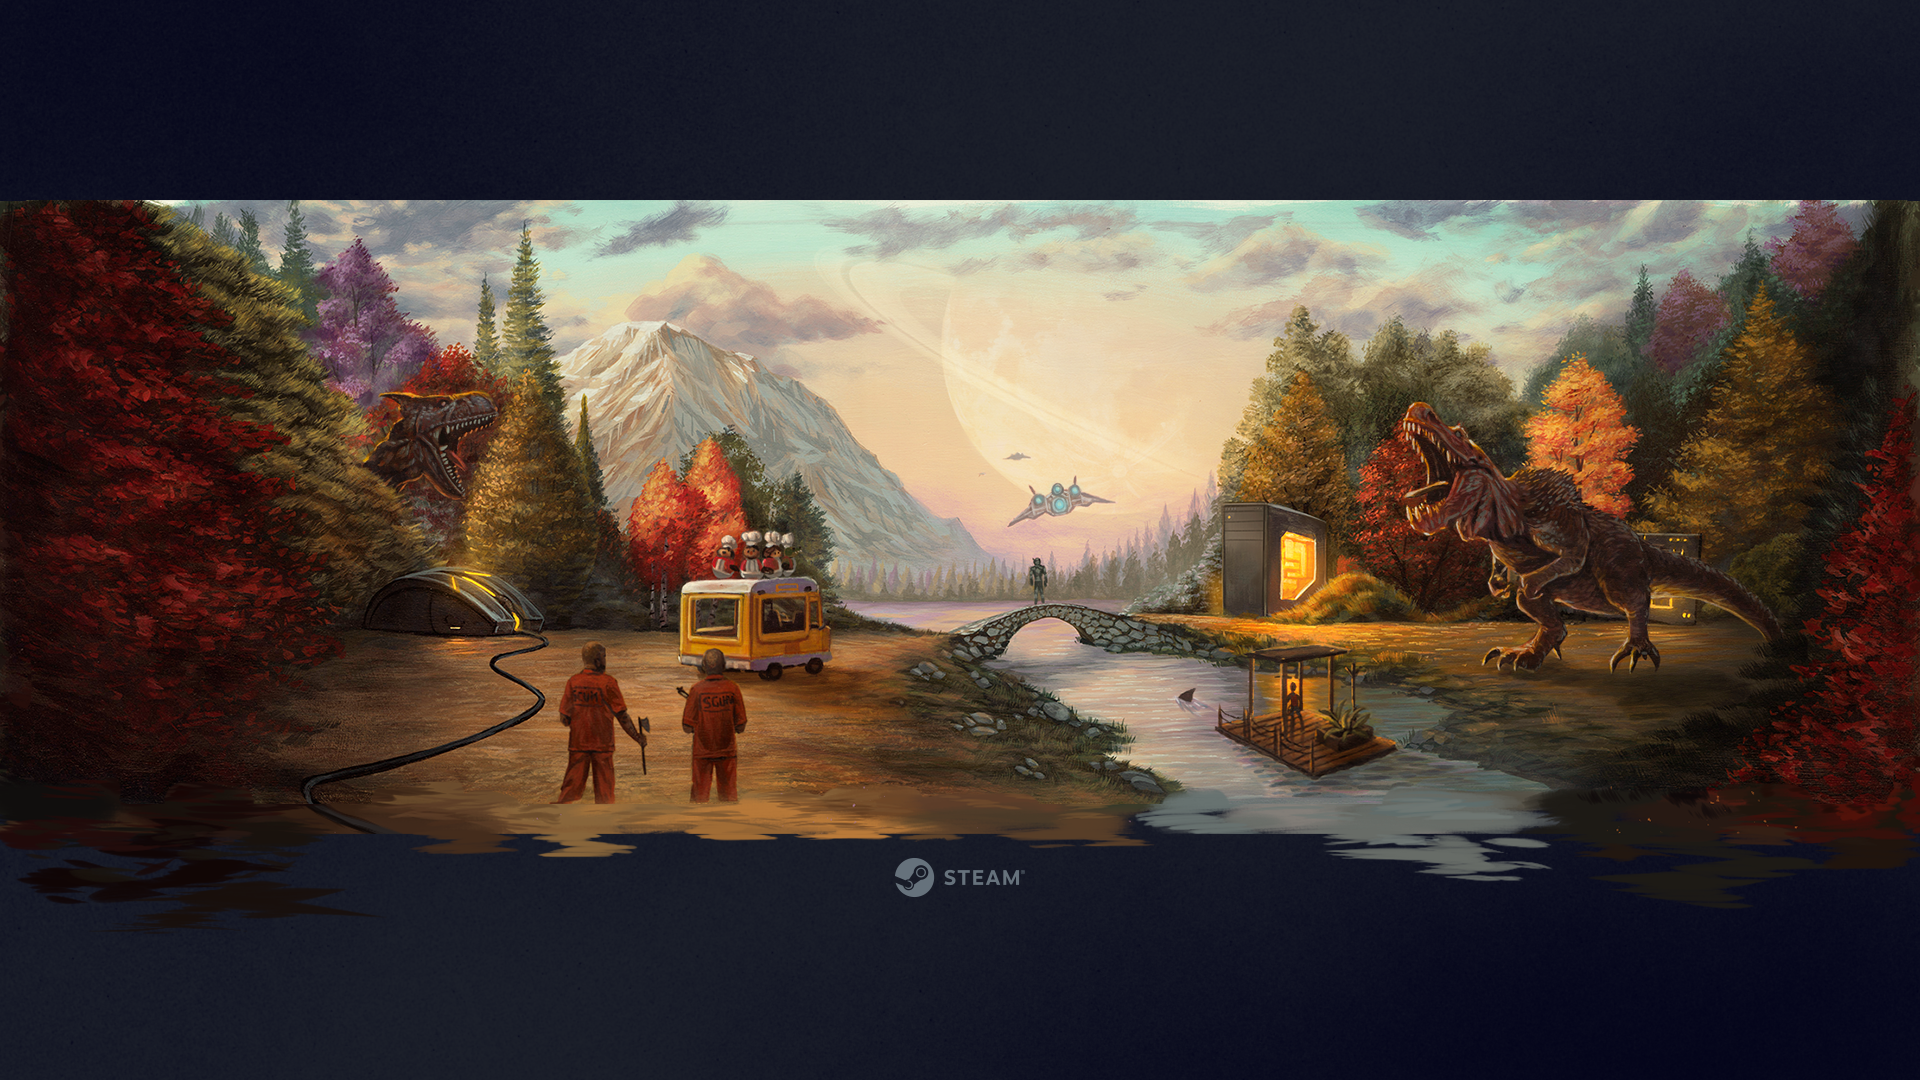 AutumnSalePaintingwithGames.png